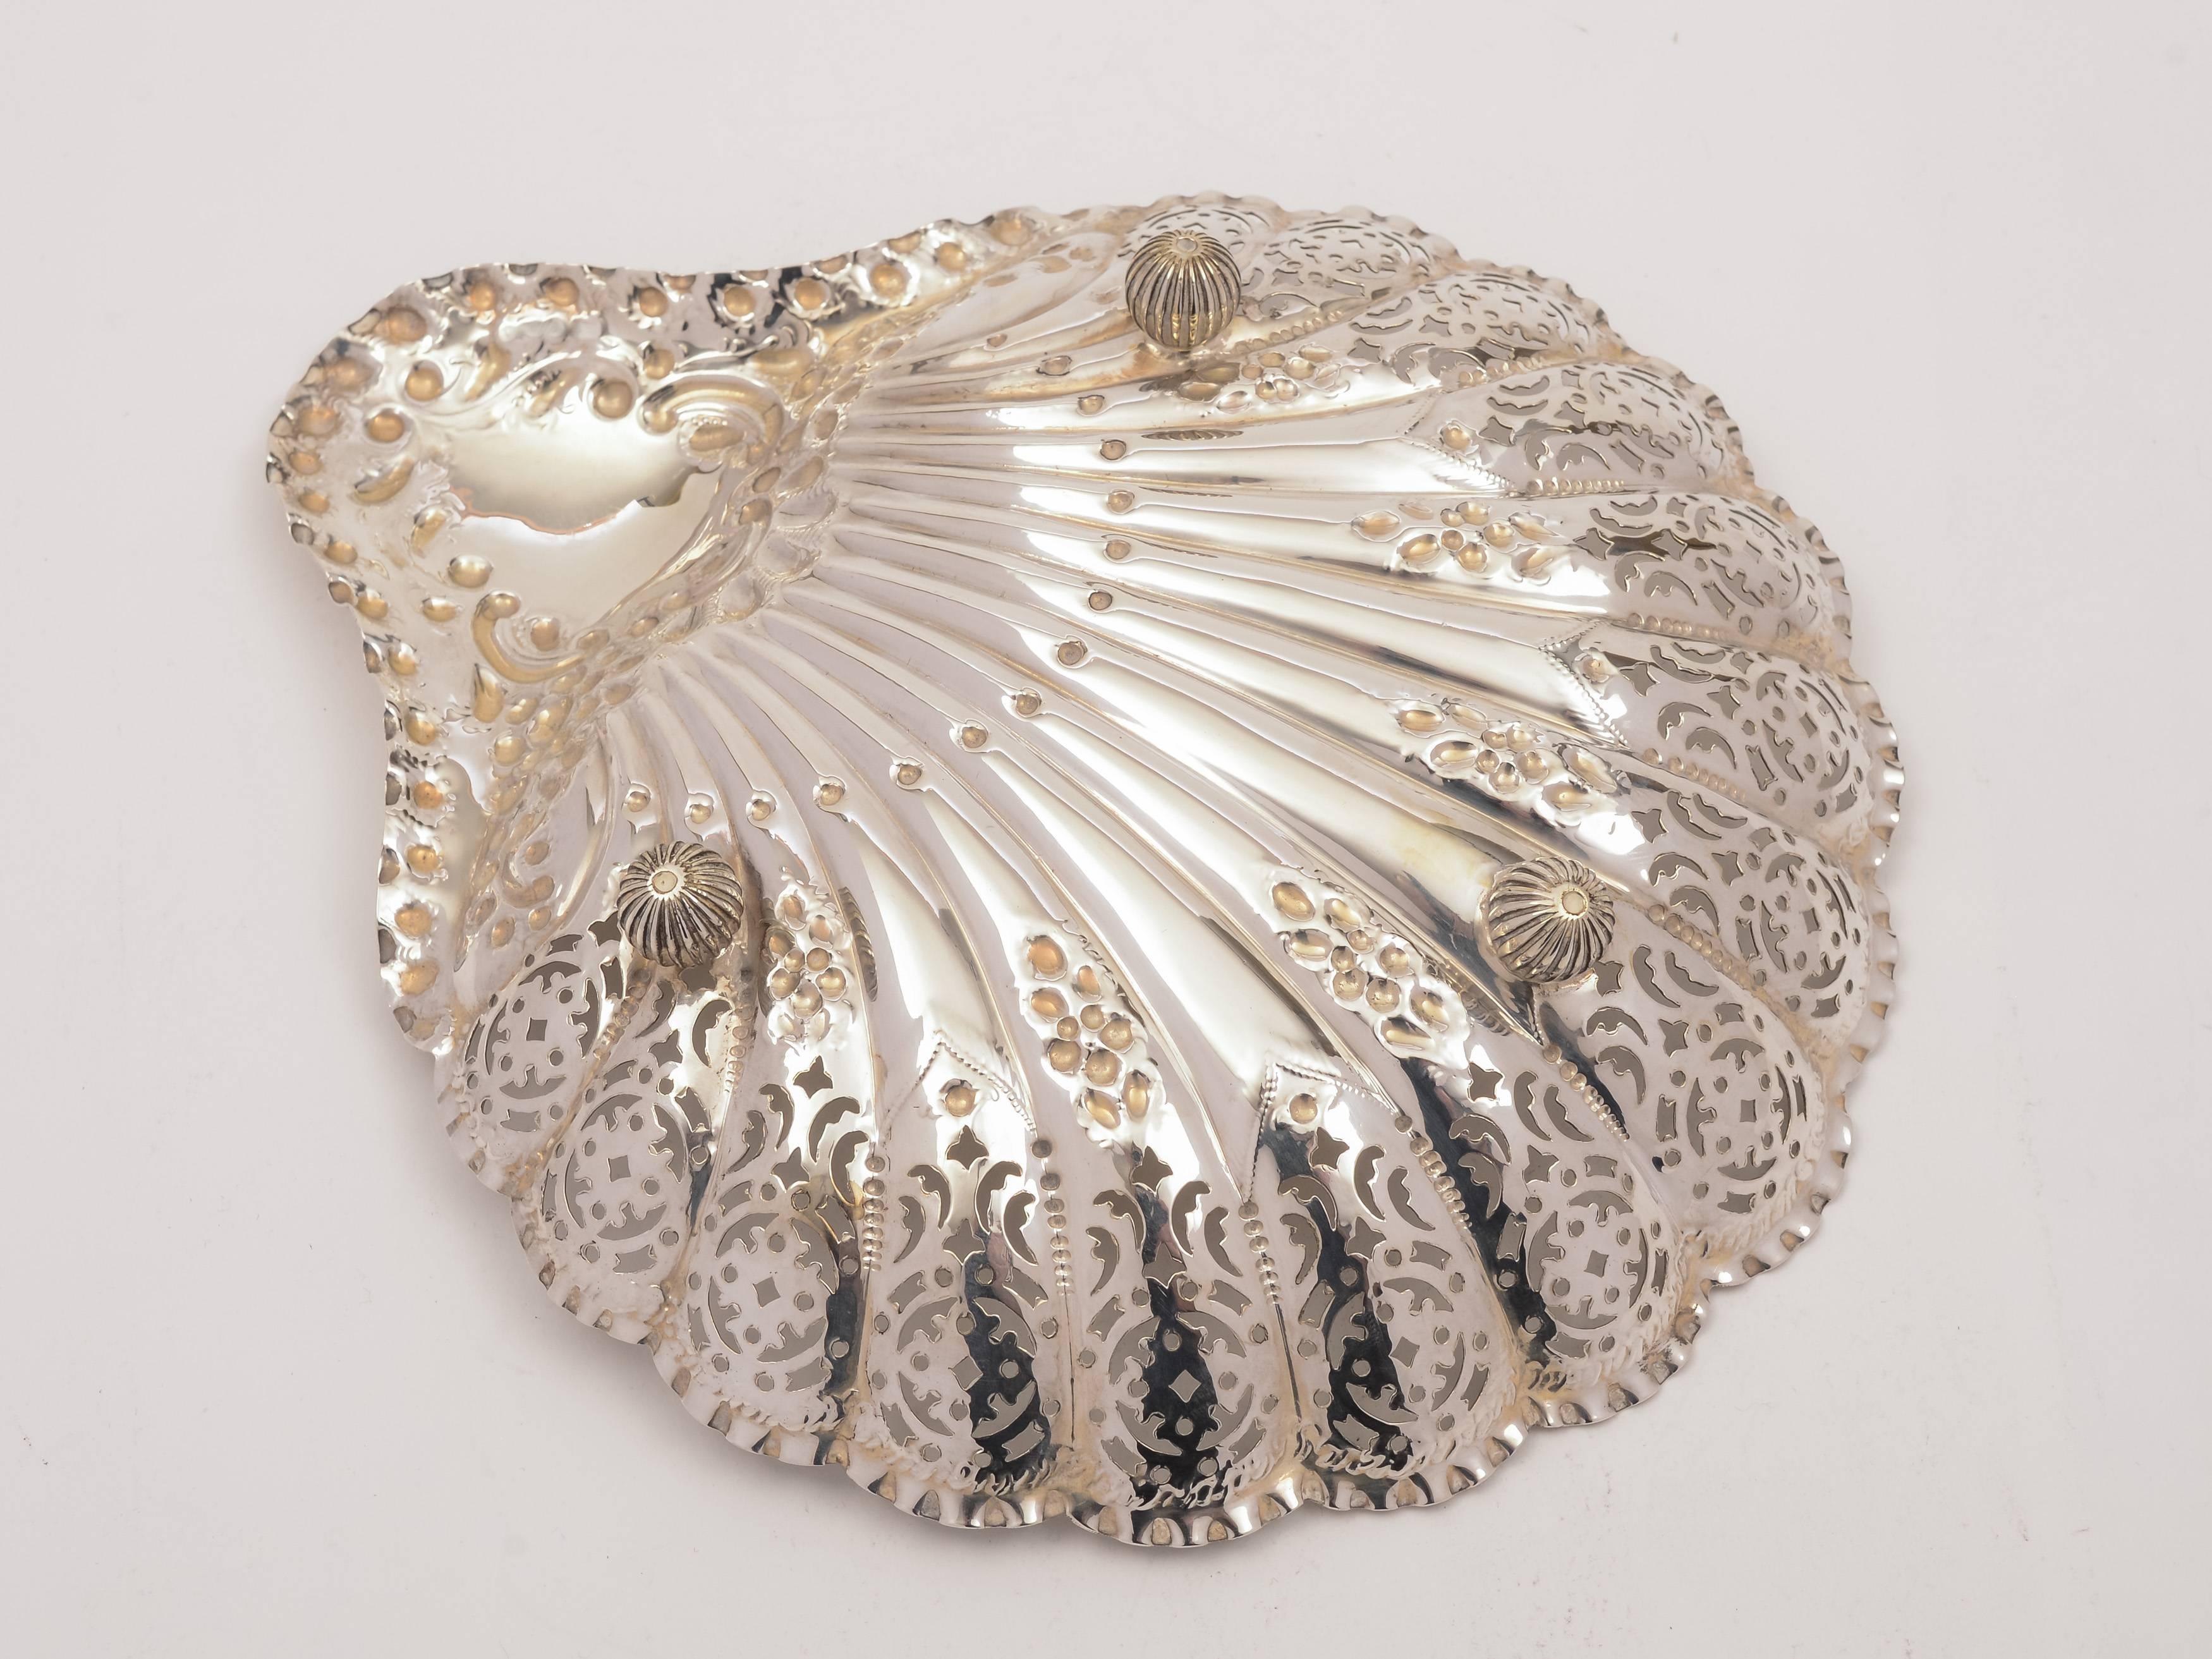 A pretty, good sized, English Victorian silver shell-shaped serving dish with beautiful pierced and embossed decoration and sits on ball feet. Hallmarked Sheffield 1896 and marked 'H A' for maker Atkin Brothers, Harry Atkins. 

Silver weight: 245g